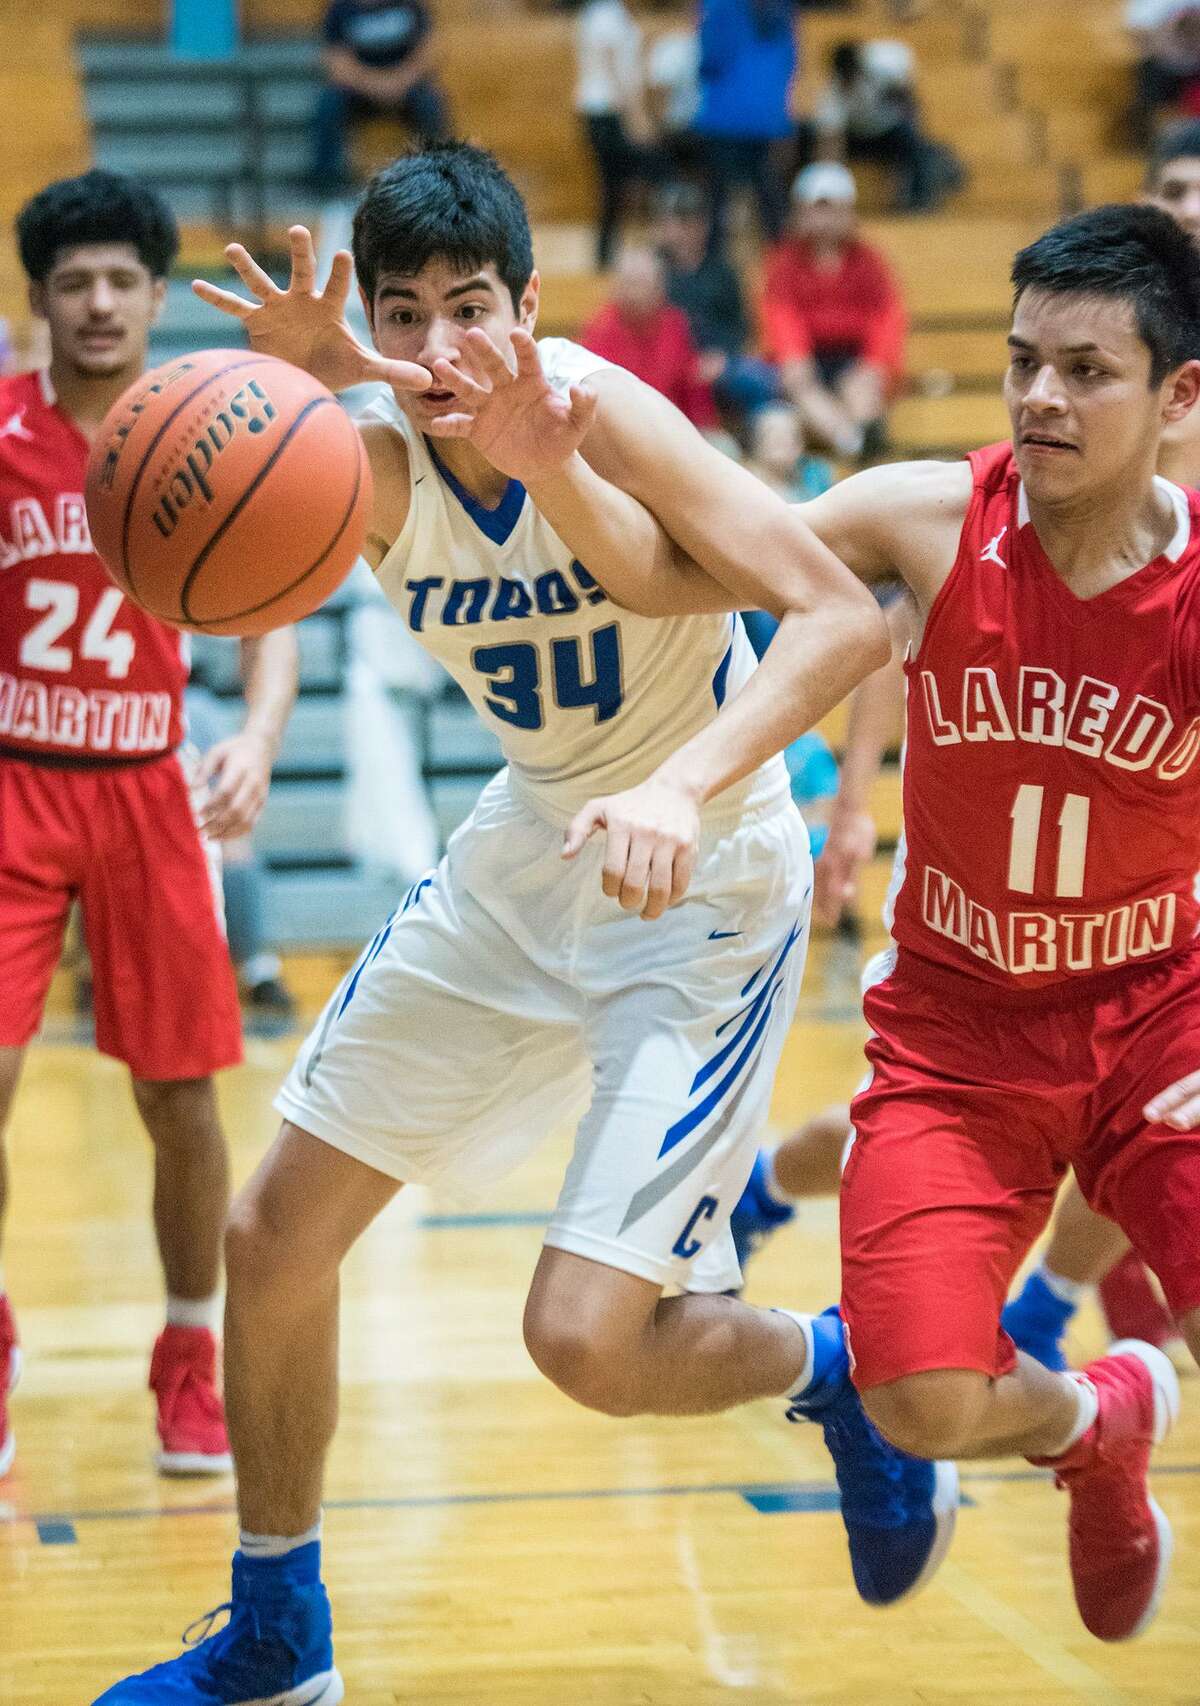 Jorge Salazar and Cigarroa host Matthew Carreon and Martin at 3 p.m. Saturday as both teams attempt to stay unbeaten in District 31-5A.